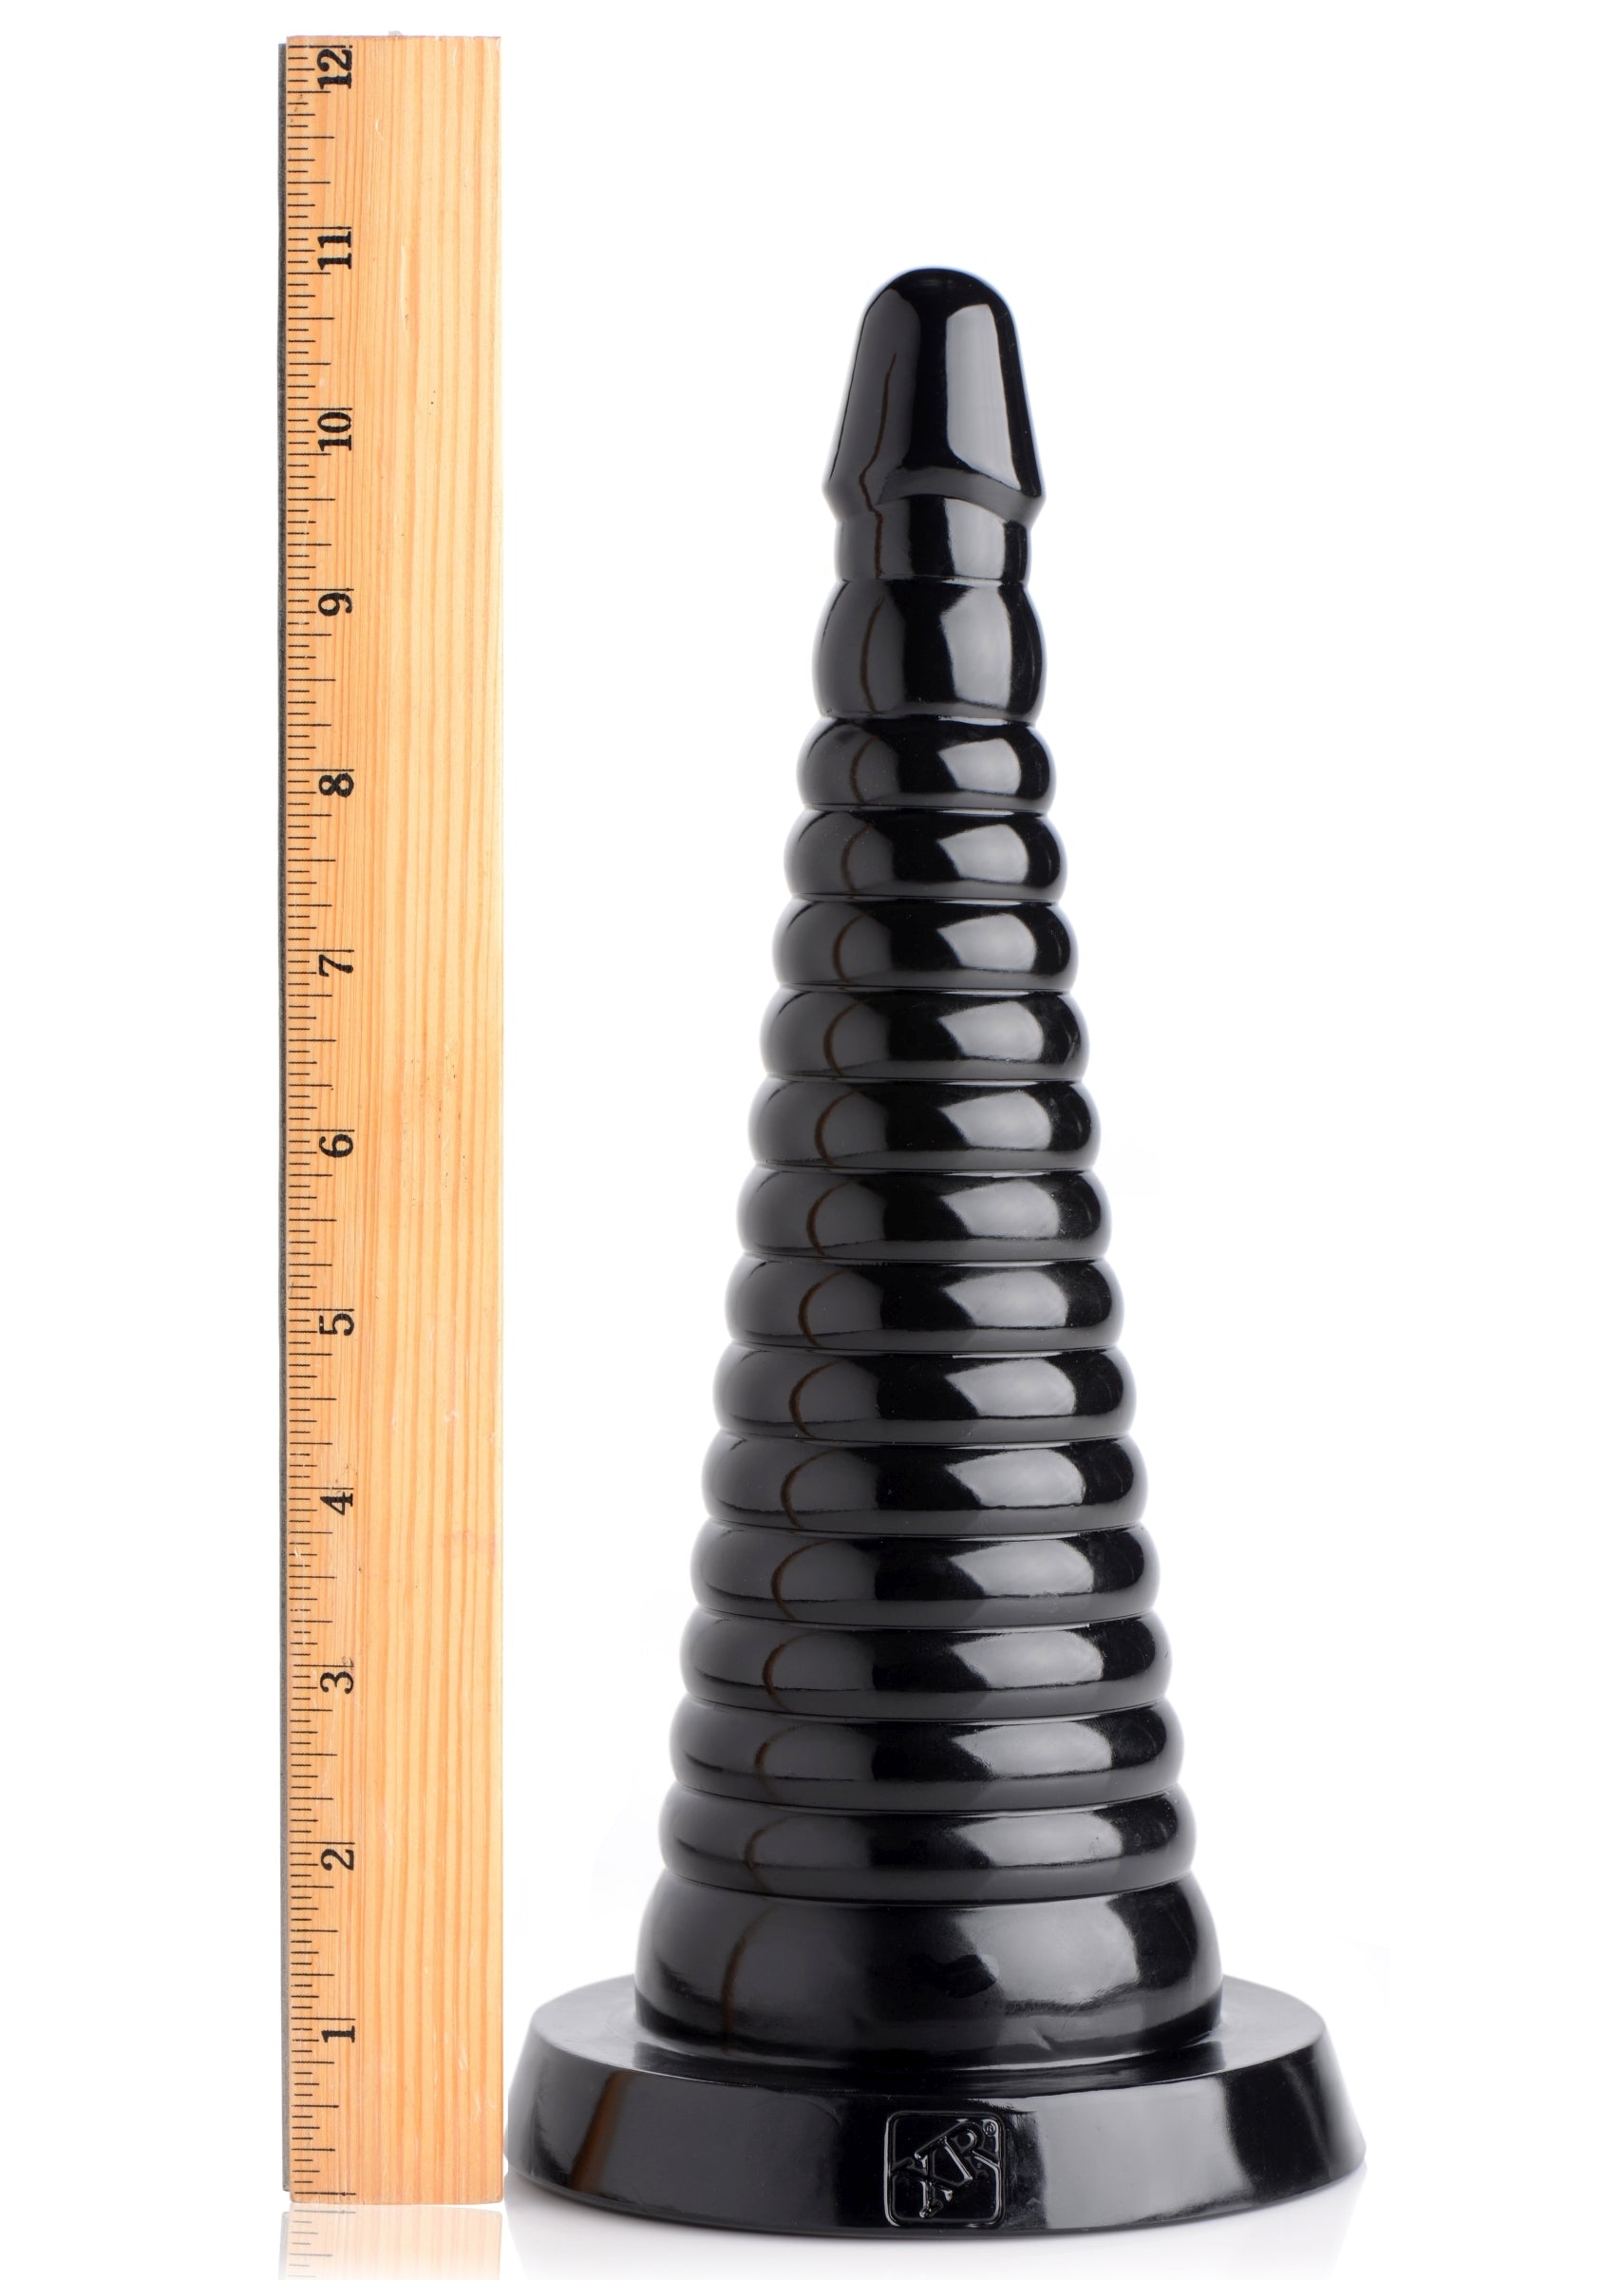 Giant Ribbed Anal Cone 
Anal Toys
Master Series Cupid’s Secret Stash